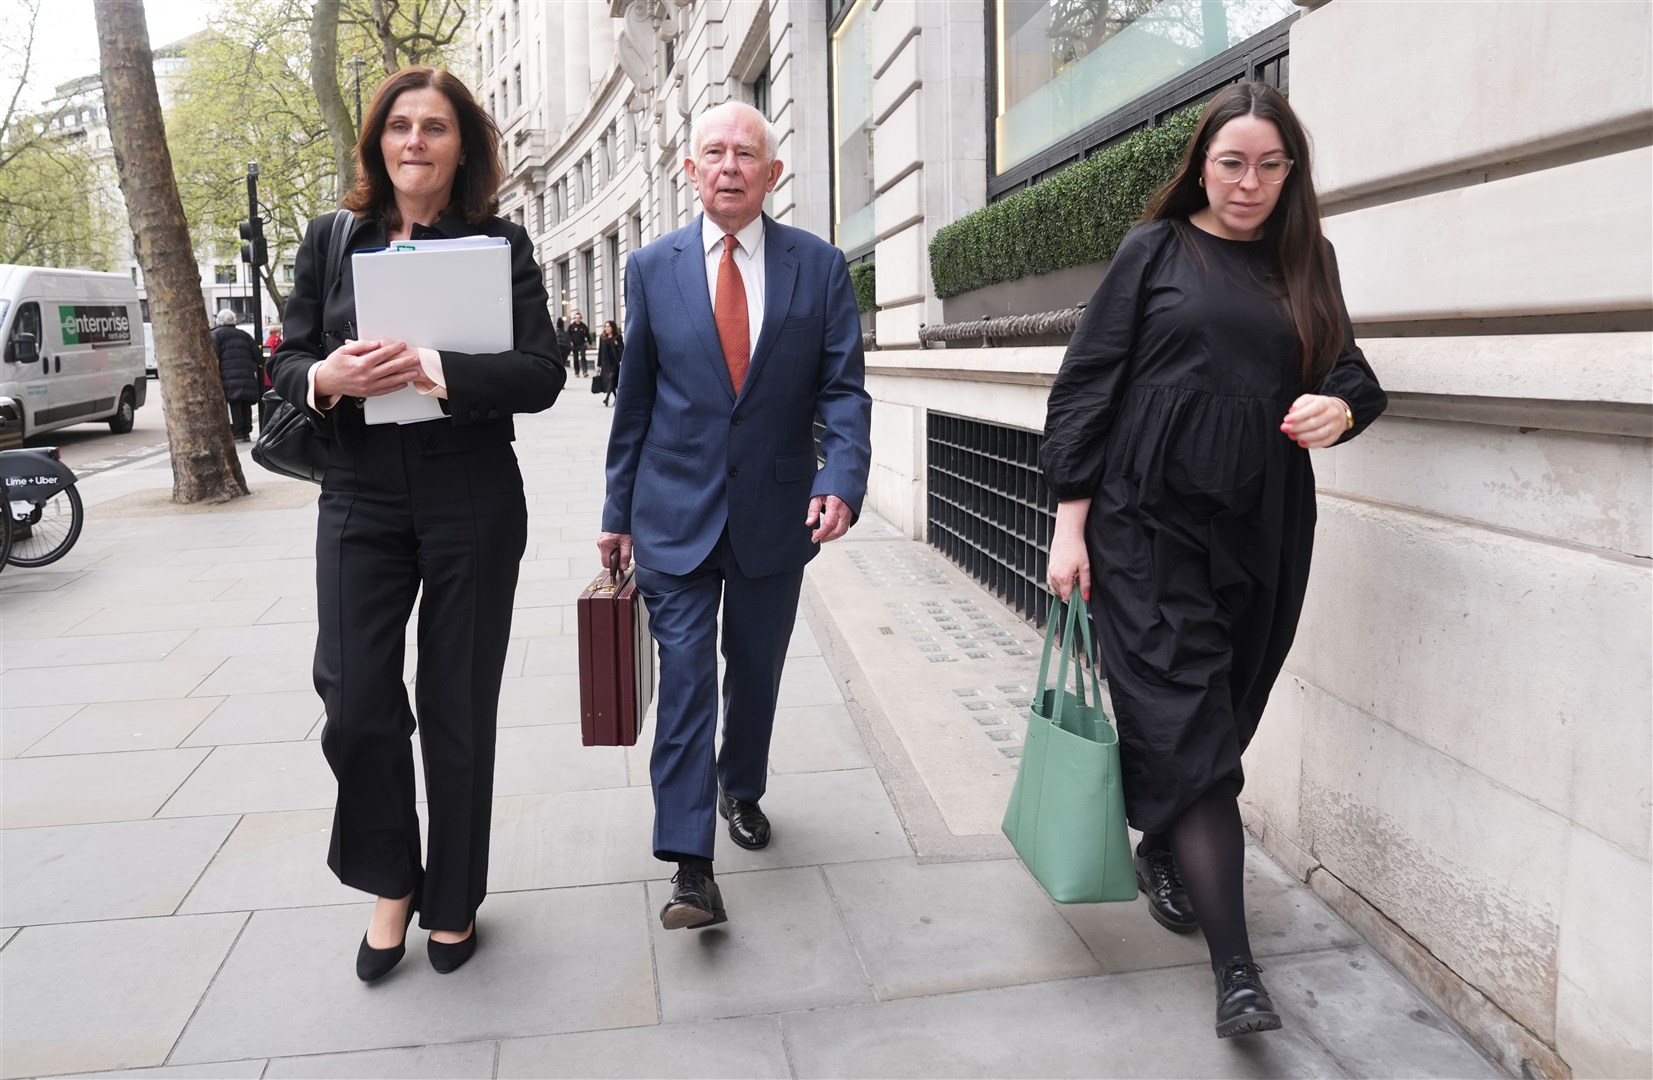 Sir Michael Hodgkinson leaves after giving evidence to the inquiry at Aldwych House, central London (Lucy North/PA)